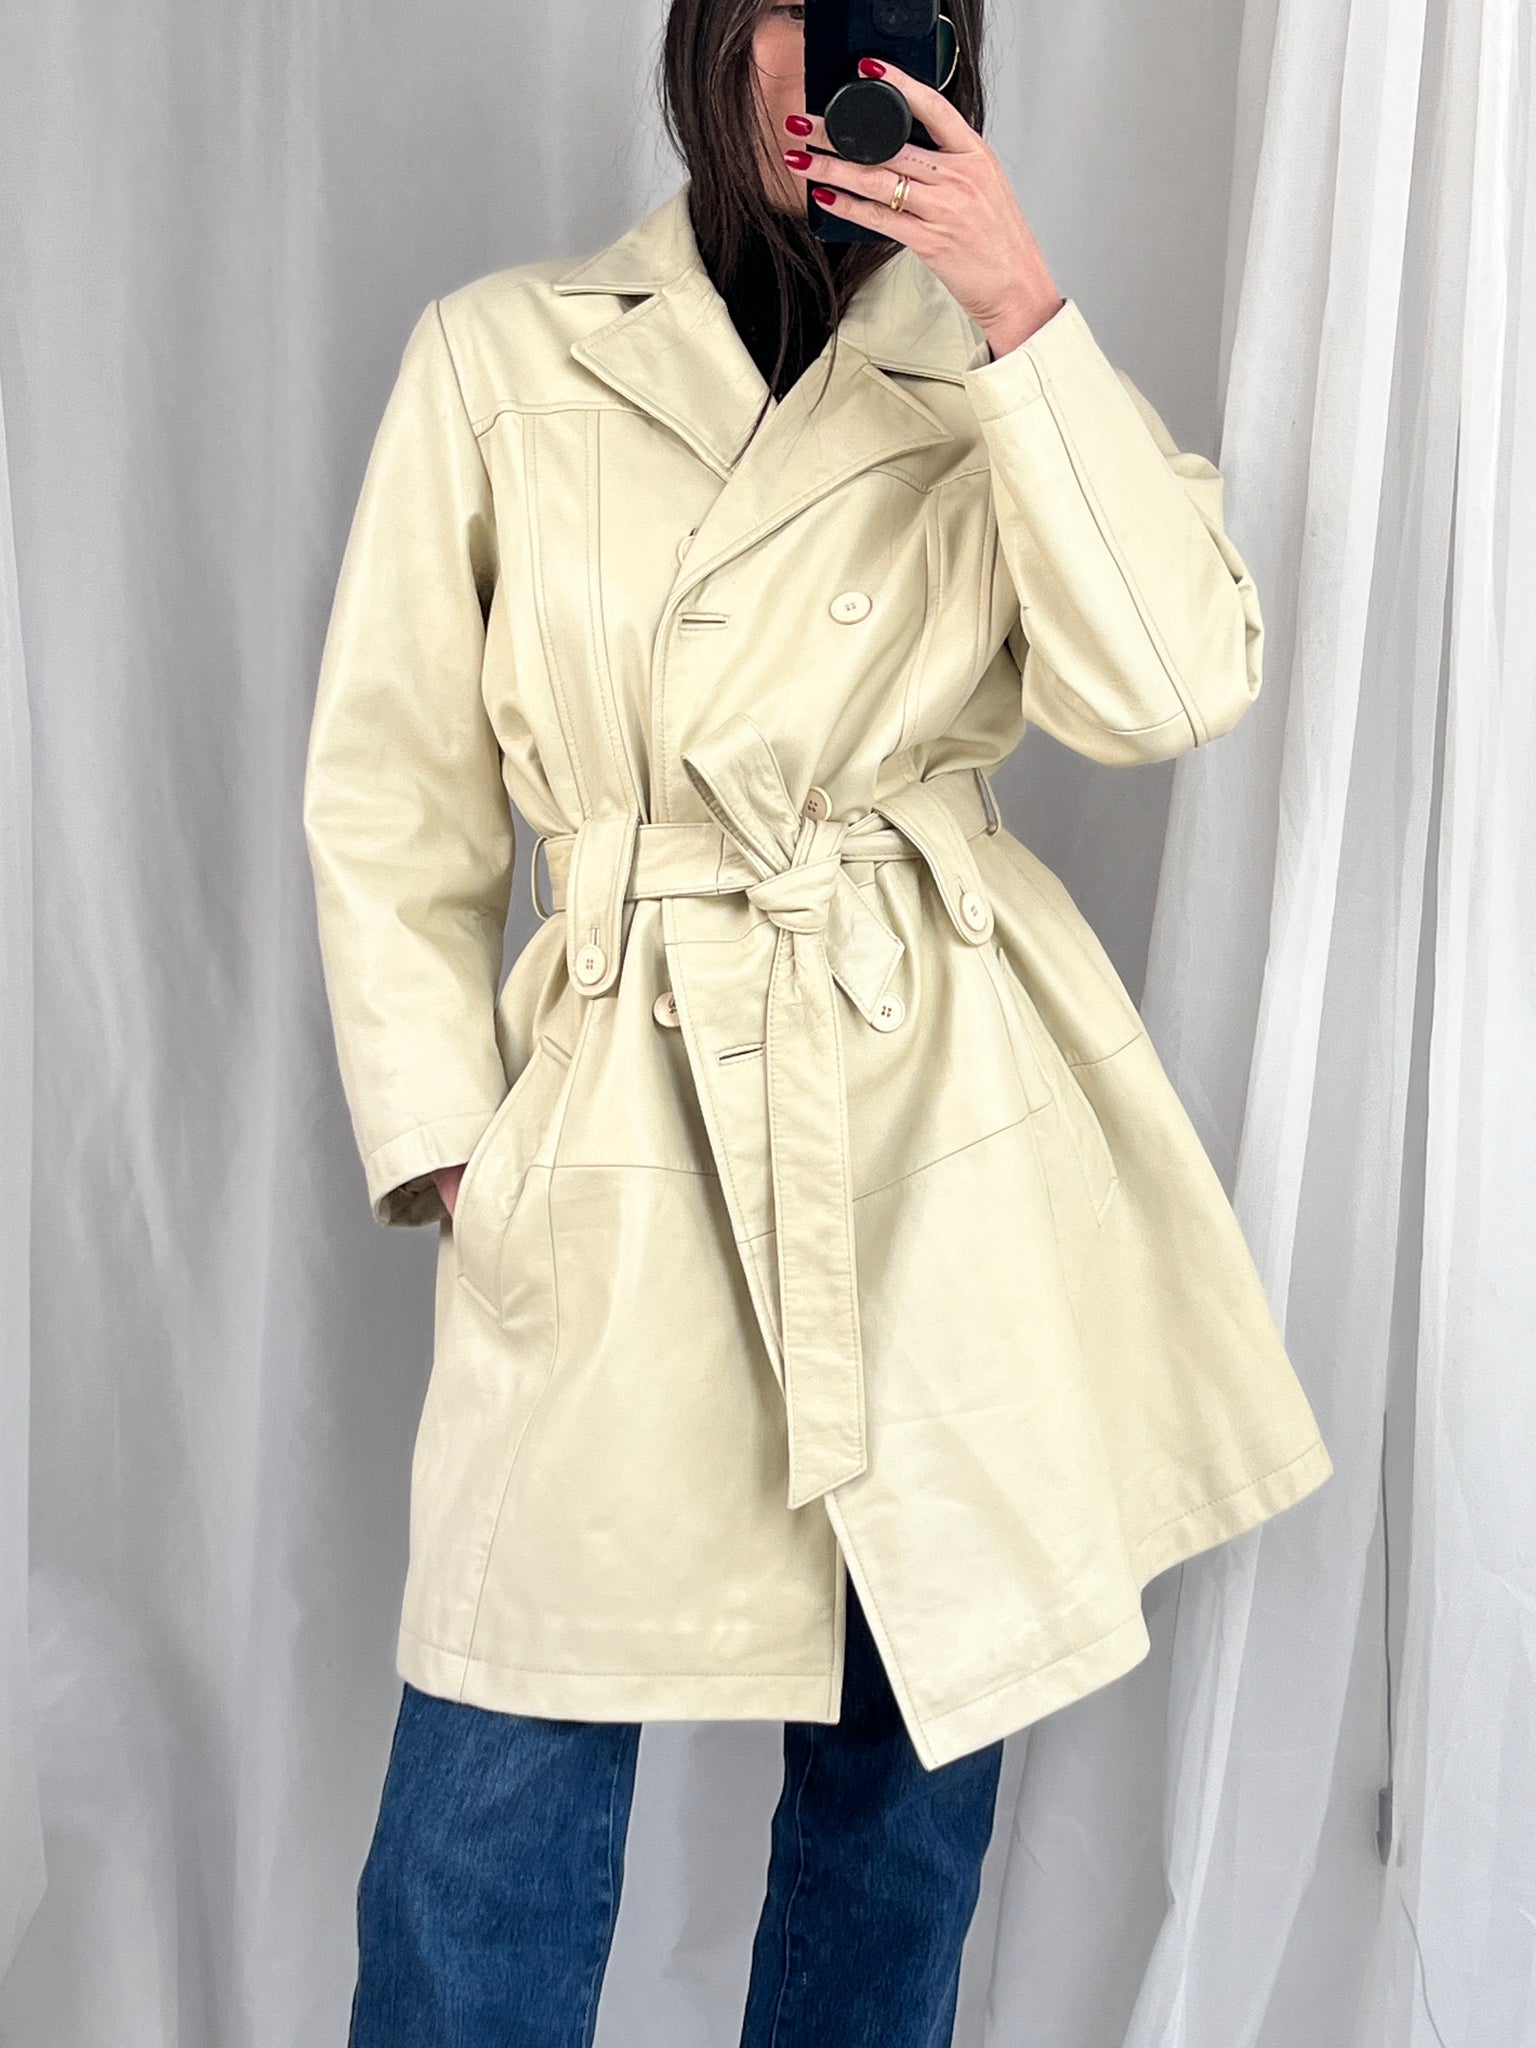 Excelled white leather trench